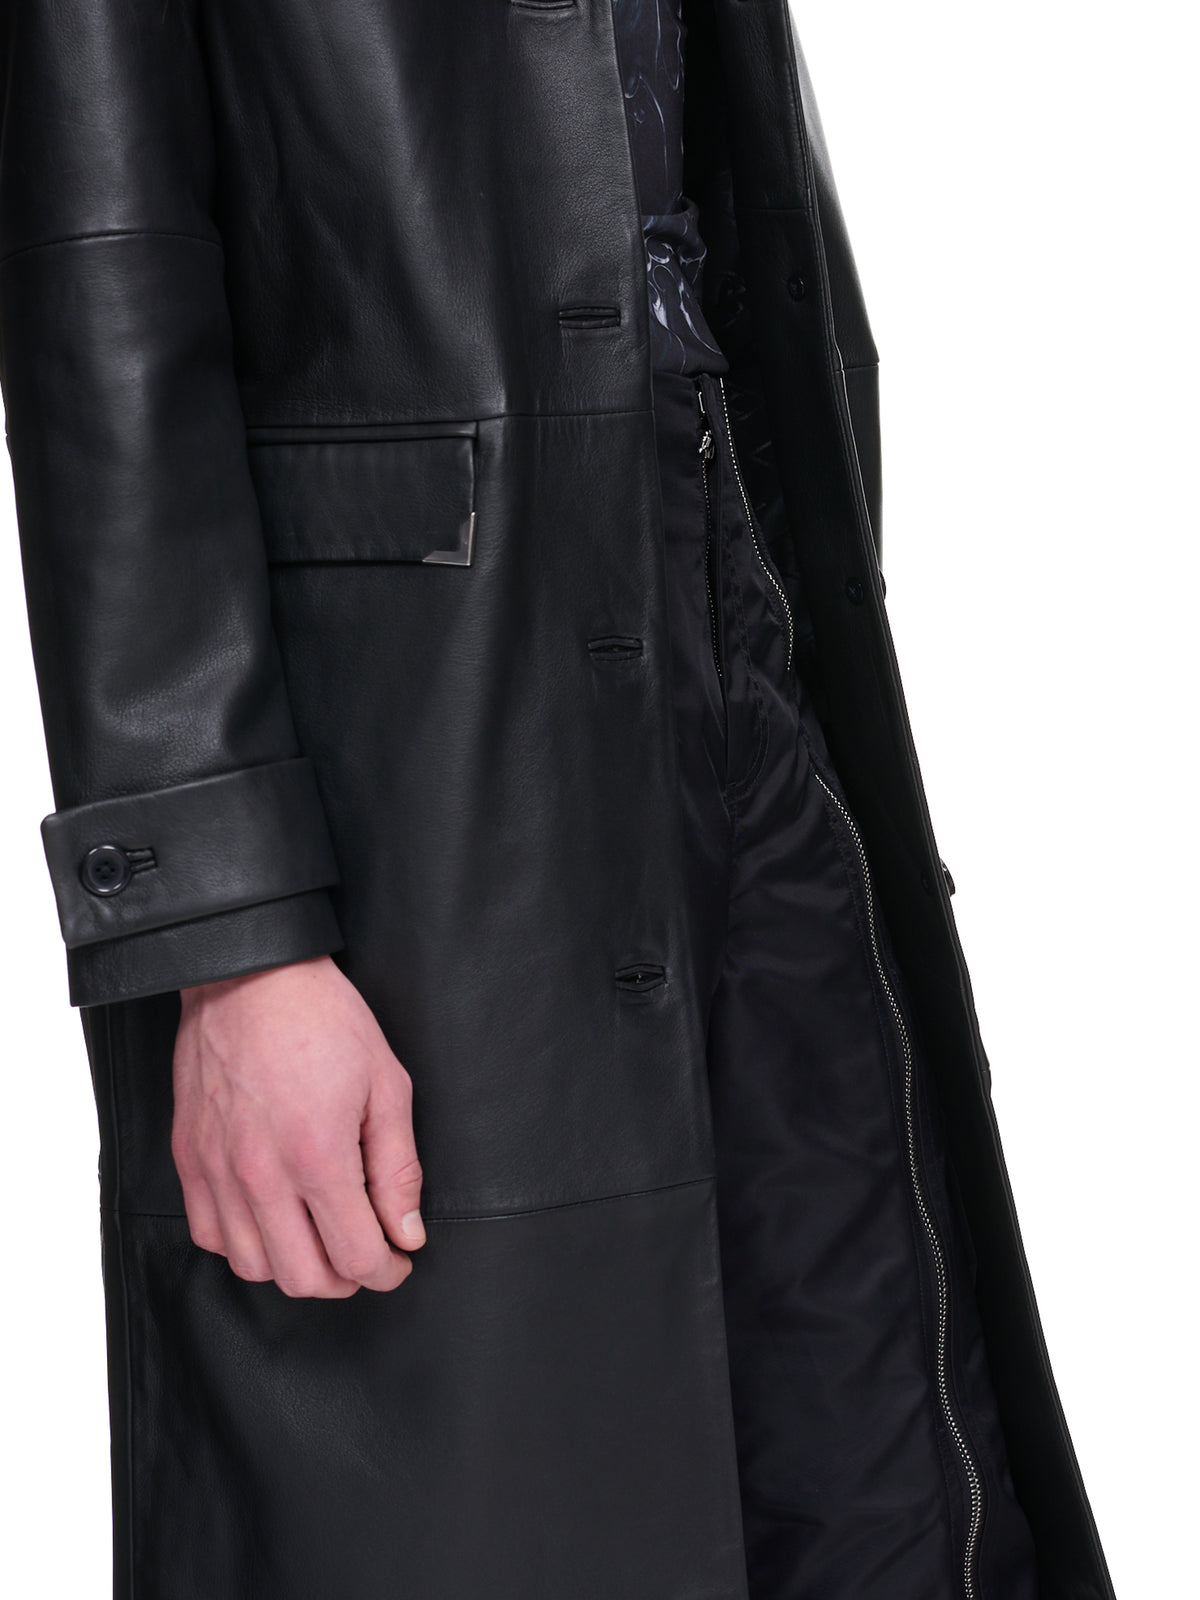 Leather Single-Breasted Coat (W-132469-BLACK)